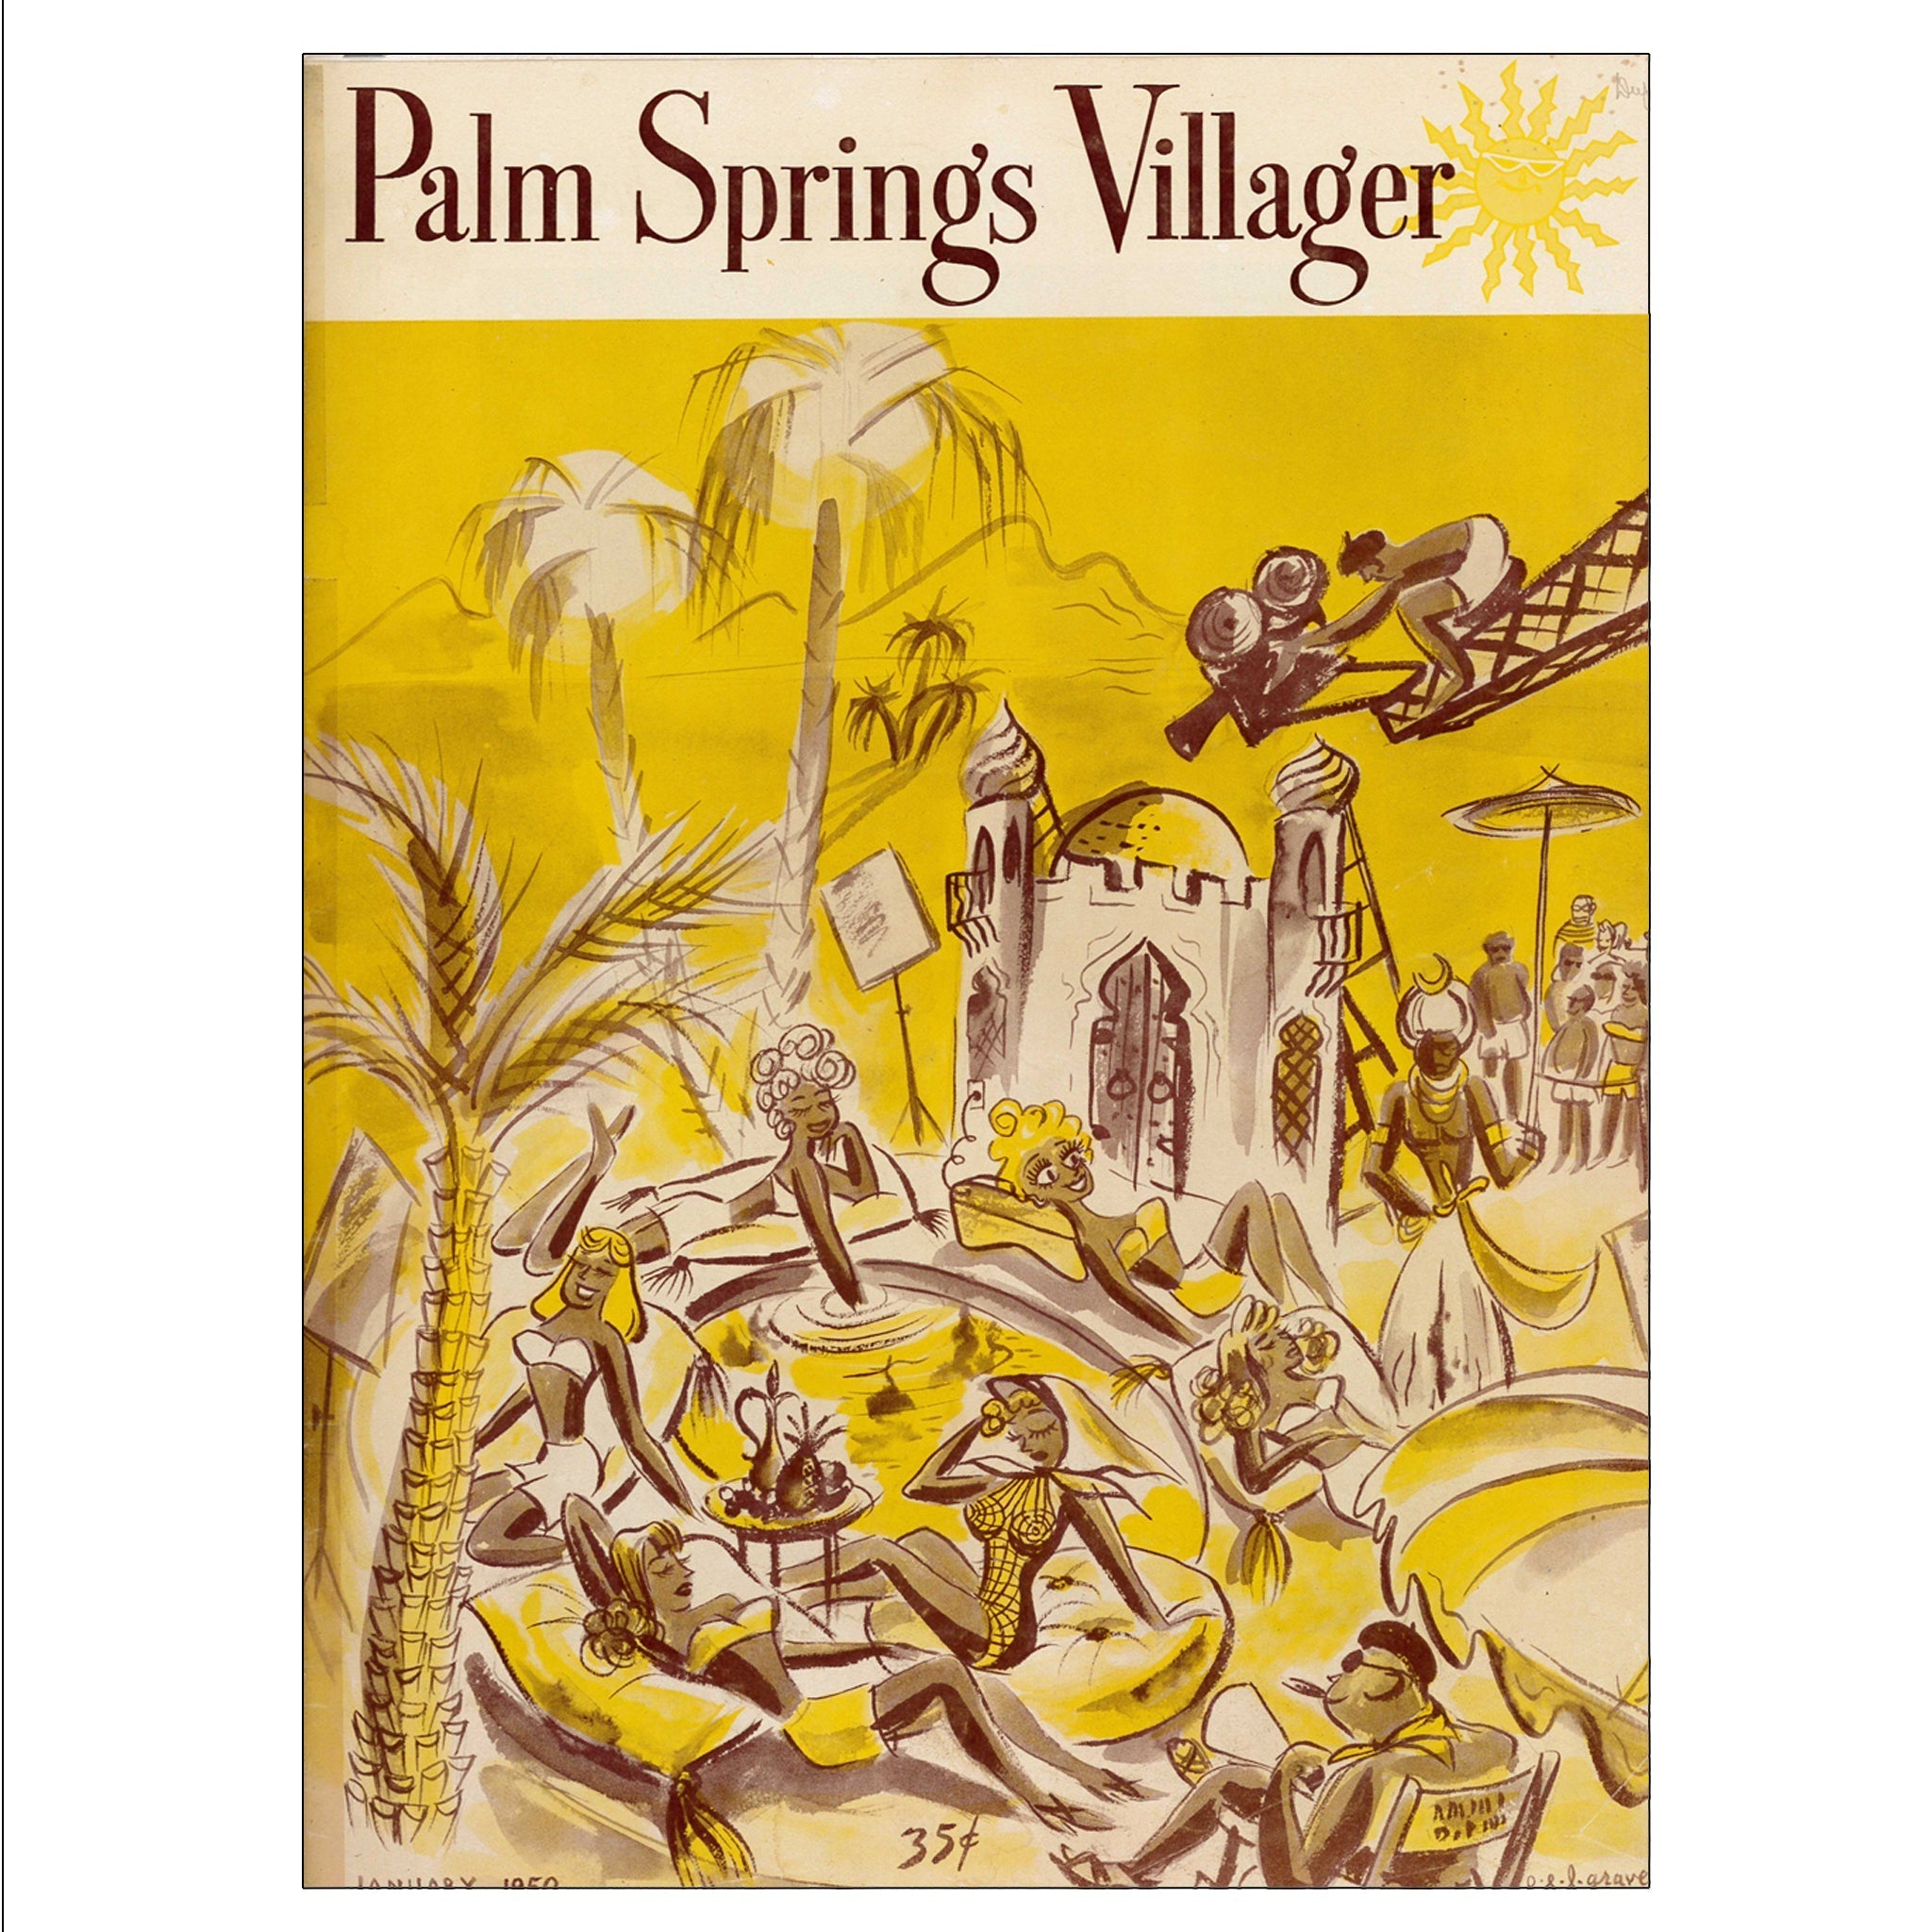 Palm Springs Villager - January 1950 - Cover Poster